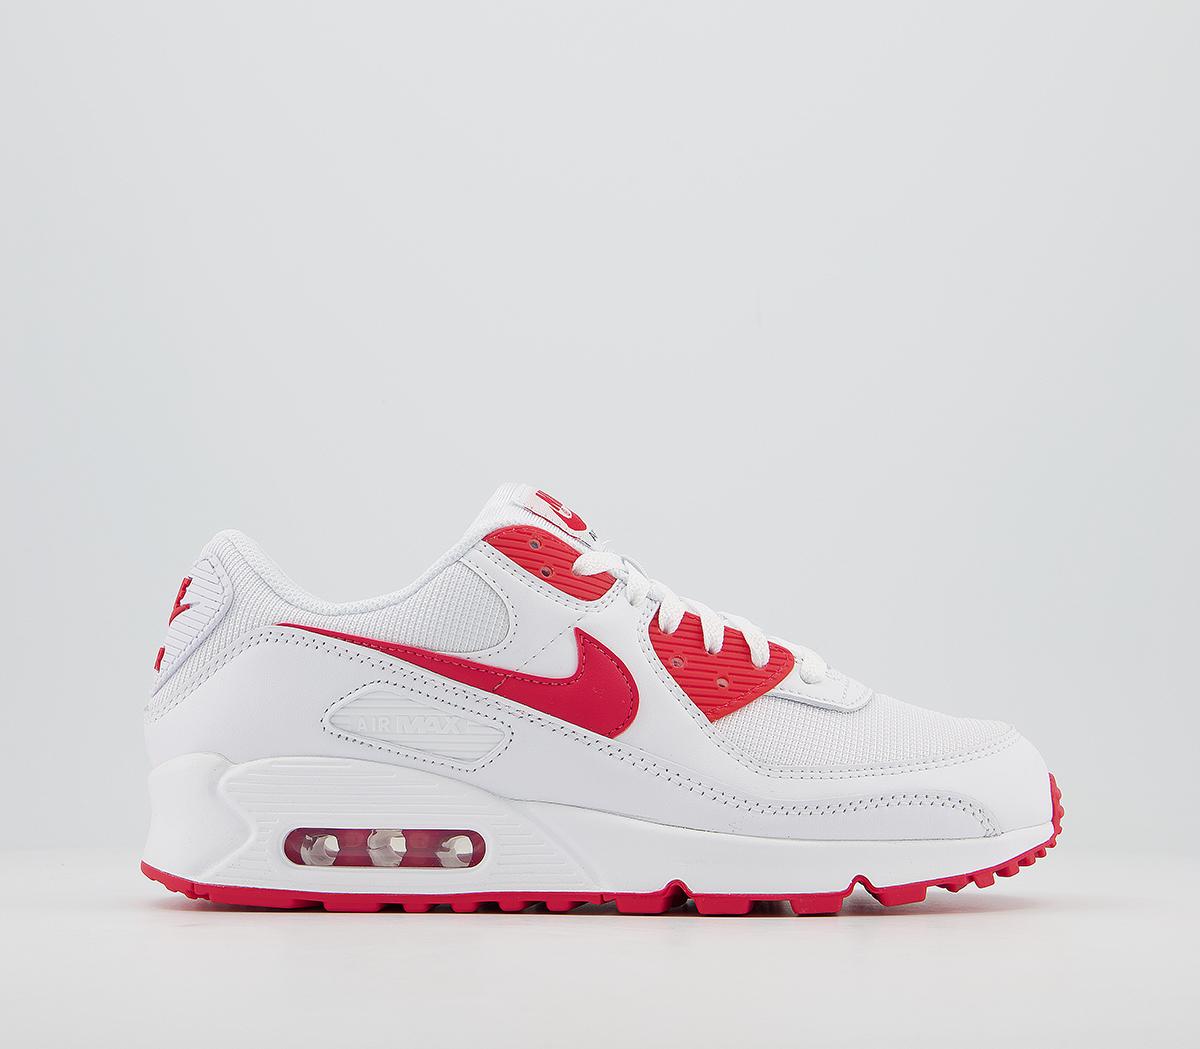 Nike Air Max 90 Trainers White Hyper Red Black His Trainers